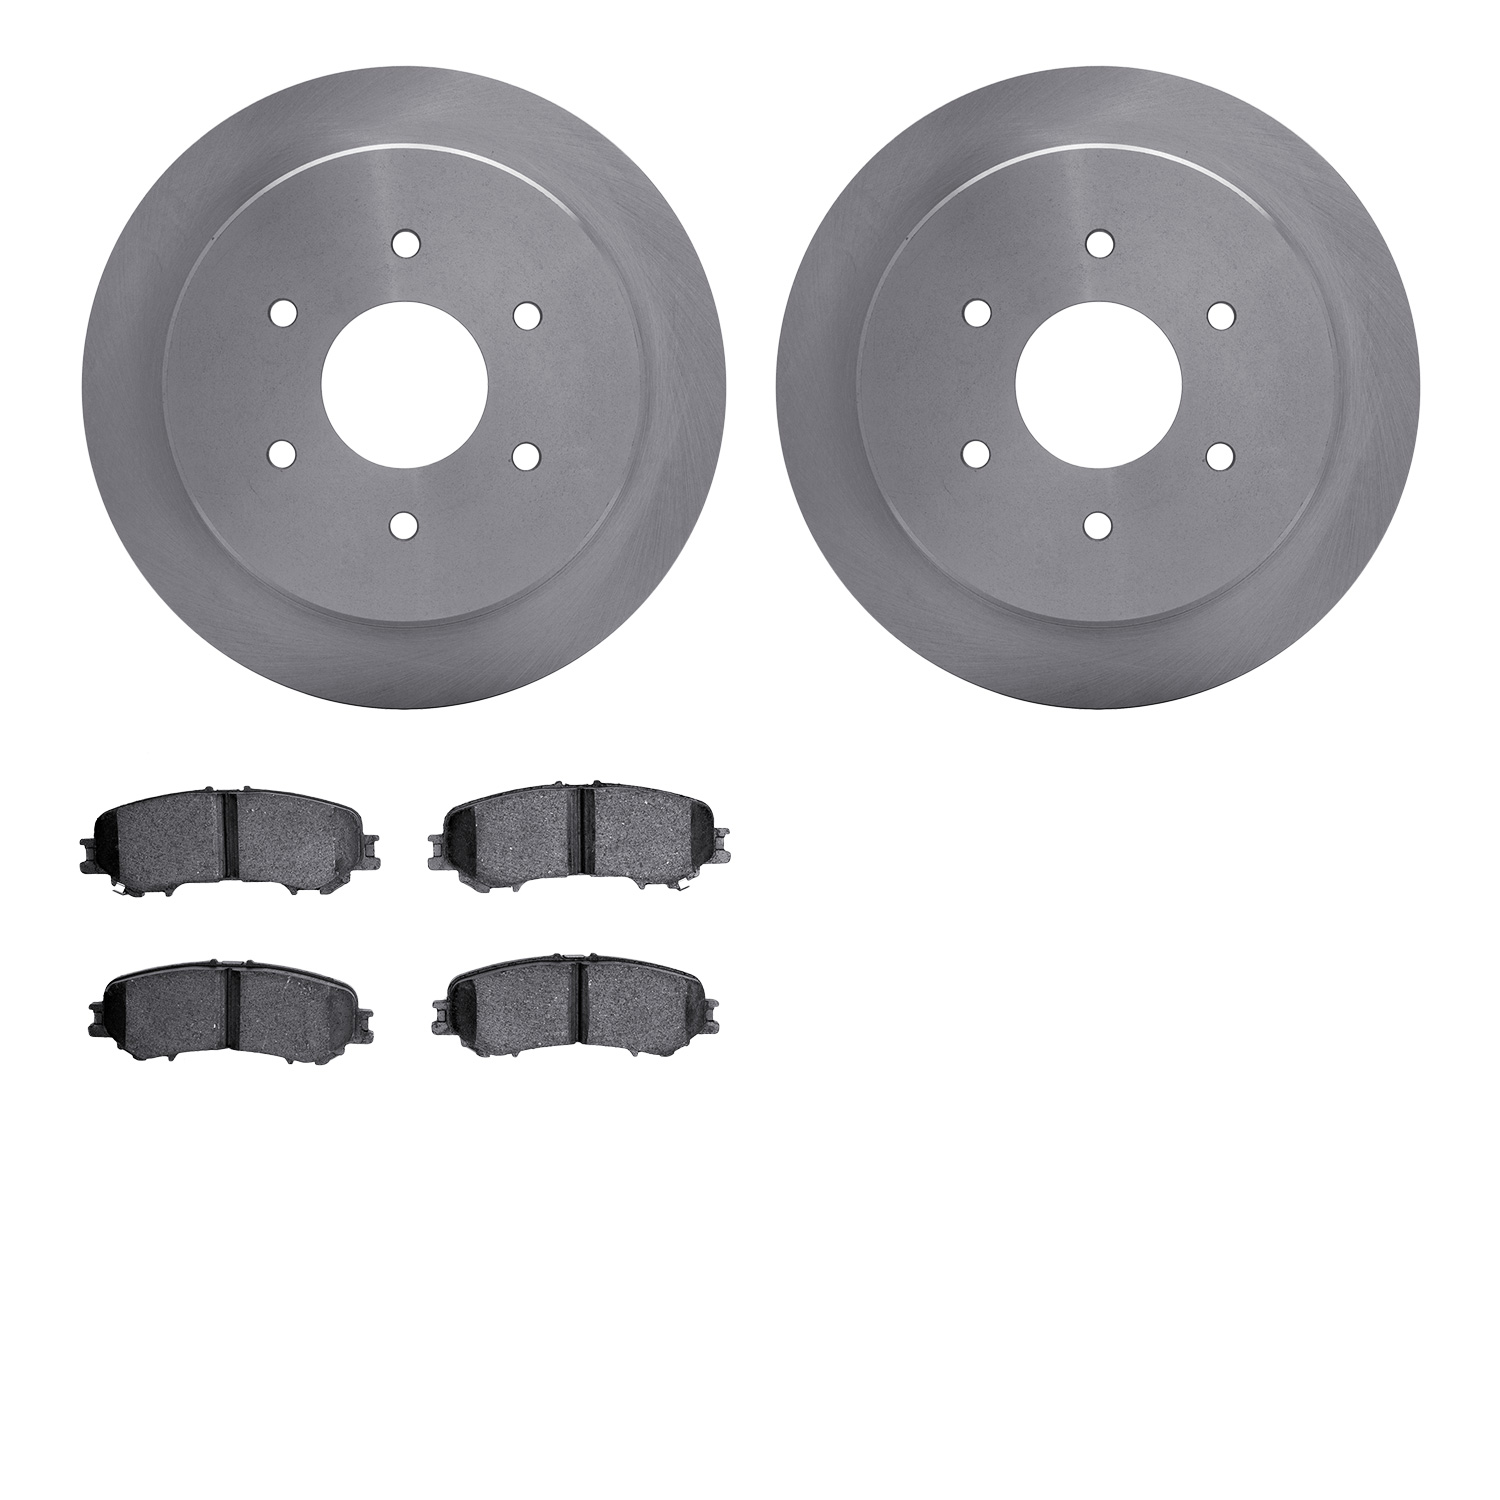 6402-67028 Brake Rotors with Ultimate-Duty Brake Pads, Fits Select Infiniti/Nissan, Position: Rear